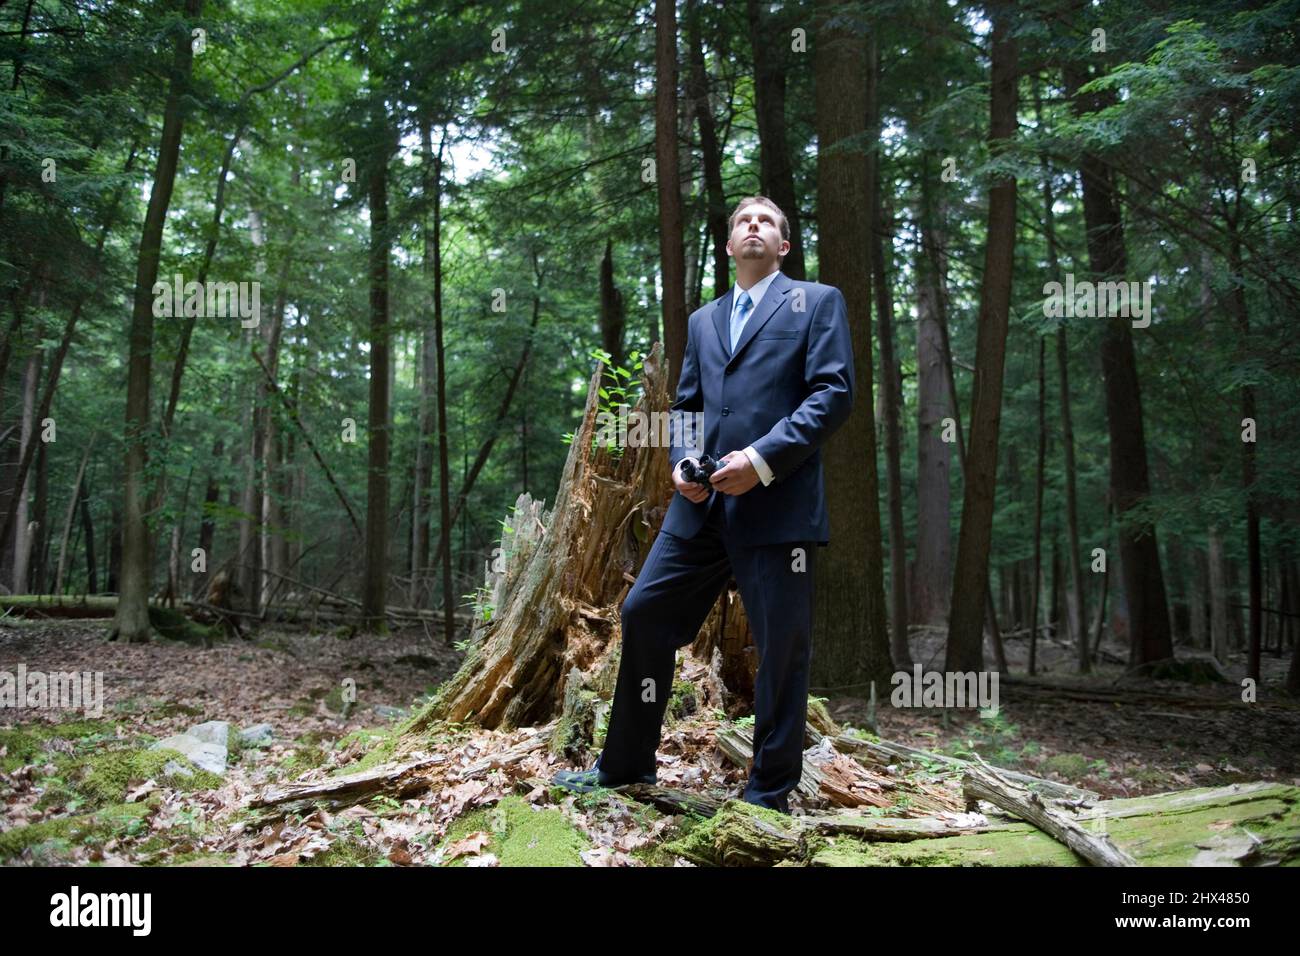 YOUNG BUSINESSMAN STANDING BY BROKEN TREE STUMP IN CLEARING OF TEMPERATE MIXED NORTHERN FOREST Stock Photo